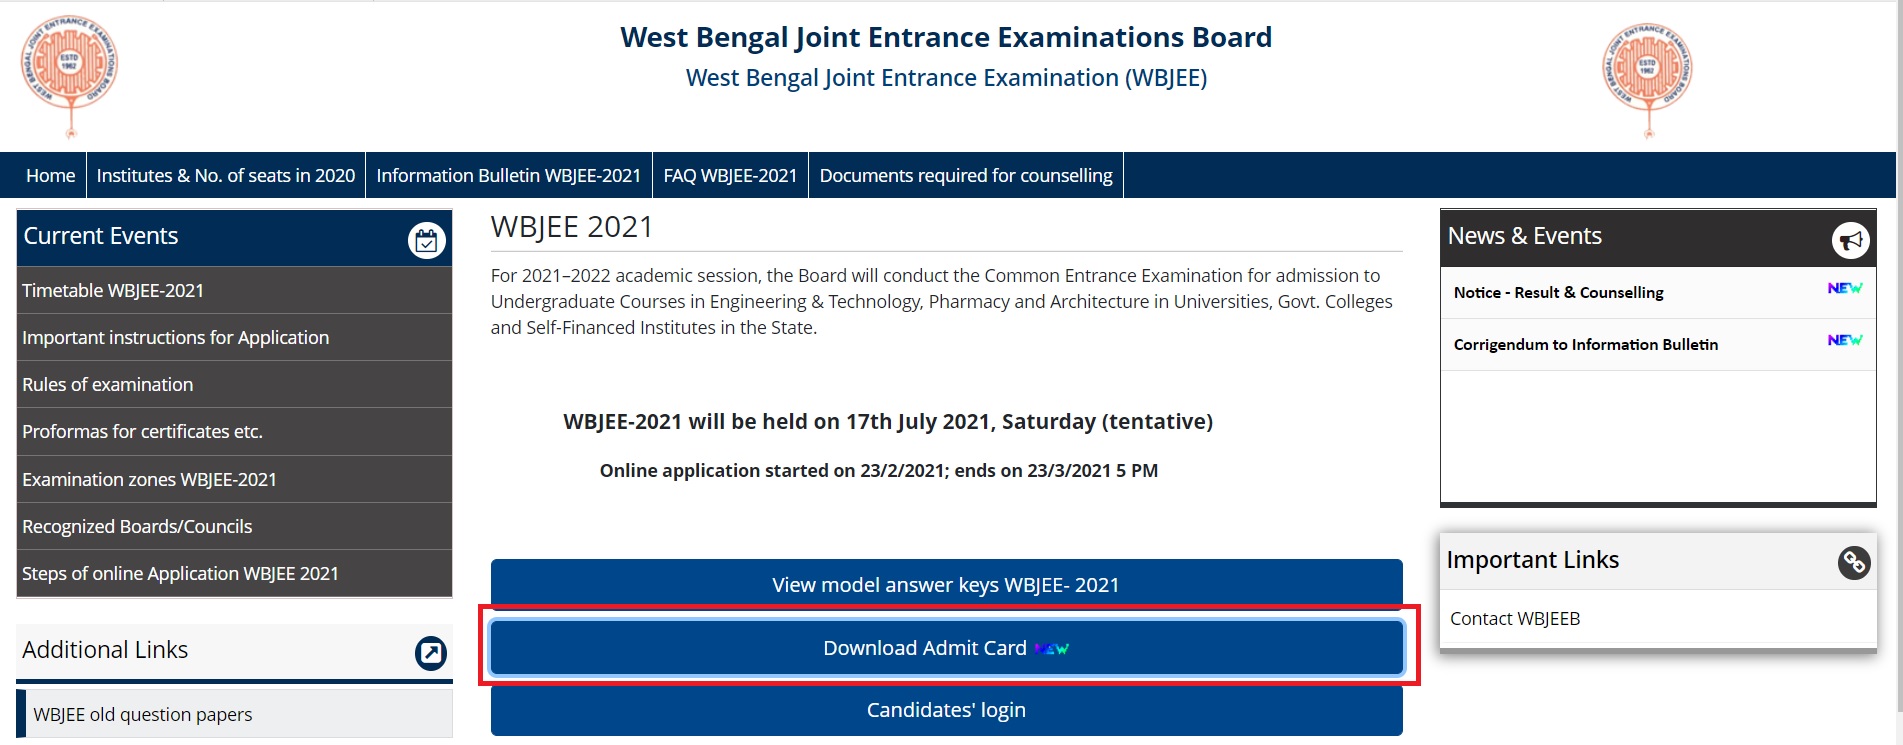 Download WBJEE admit card